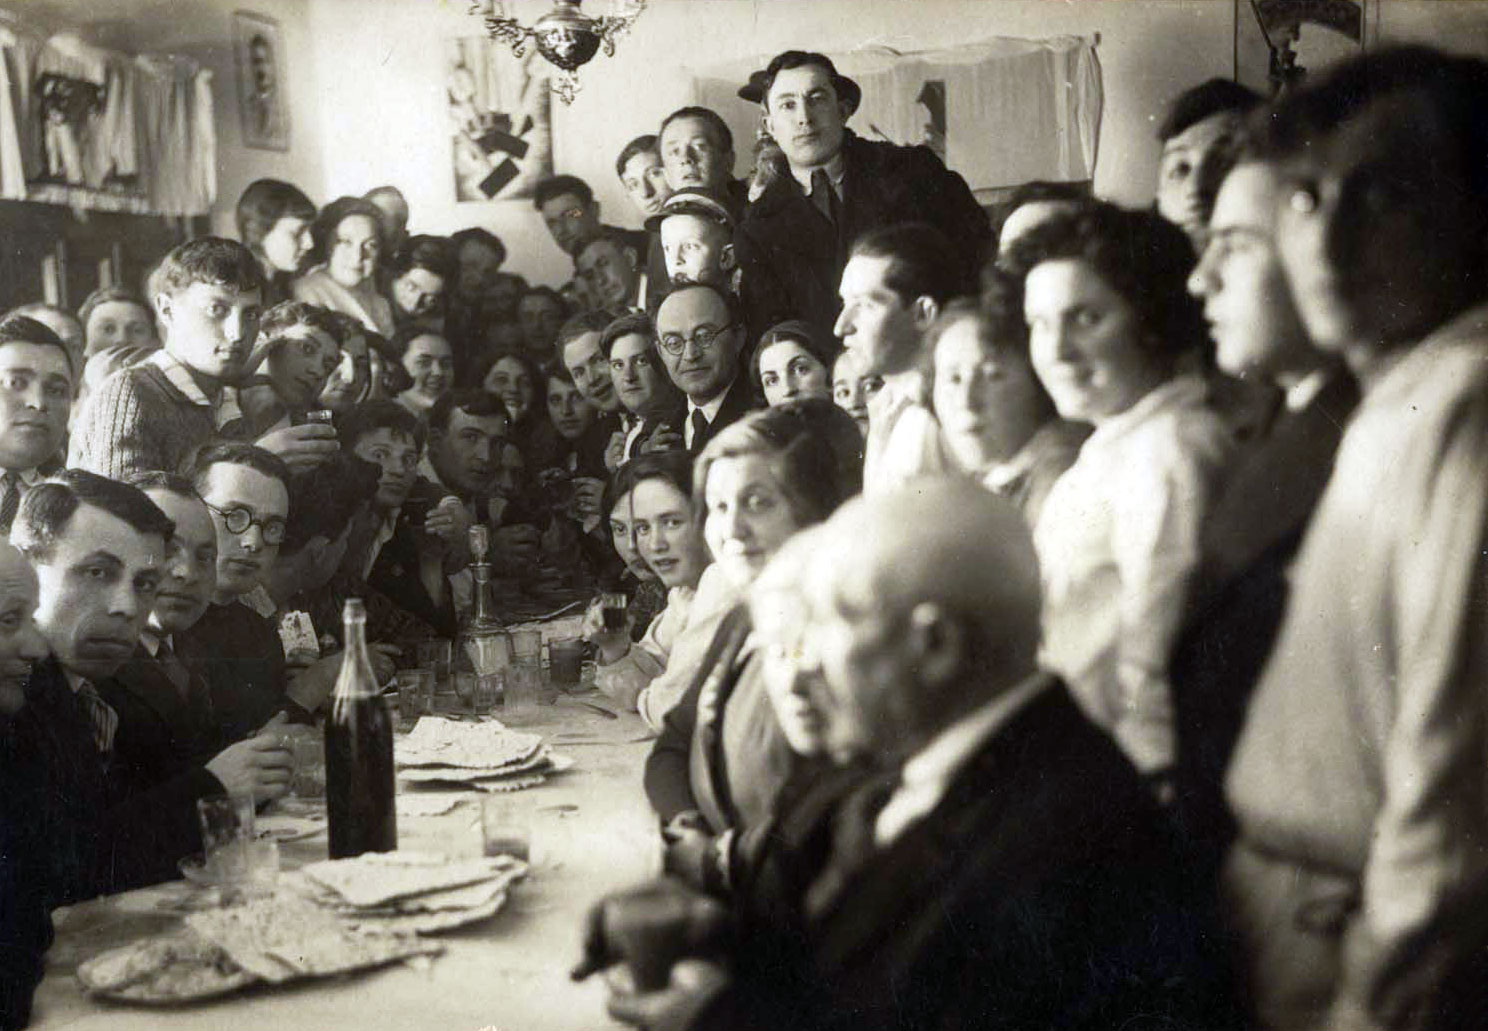 Kostopol, Poland, a group photograph of members of a Hachshara (agricultural training program) during Passover 